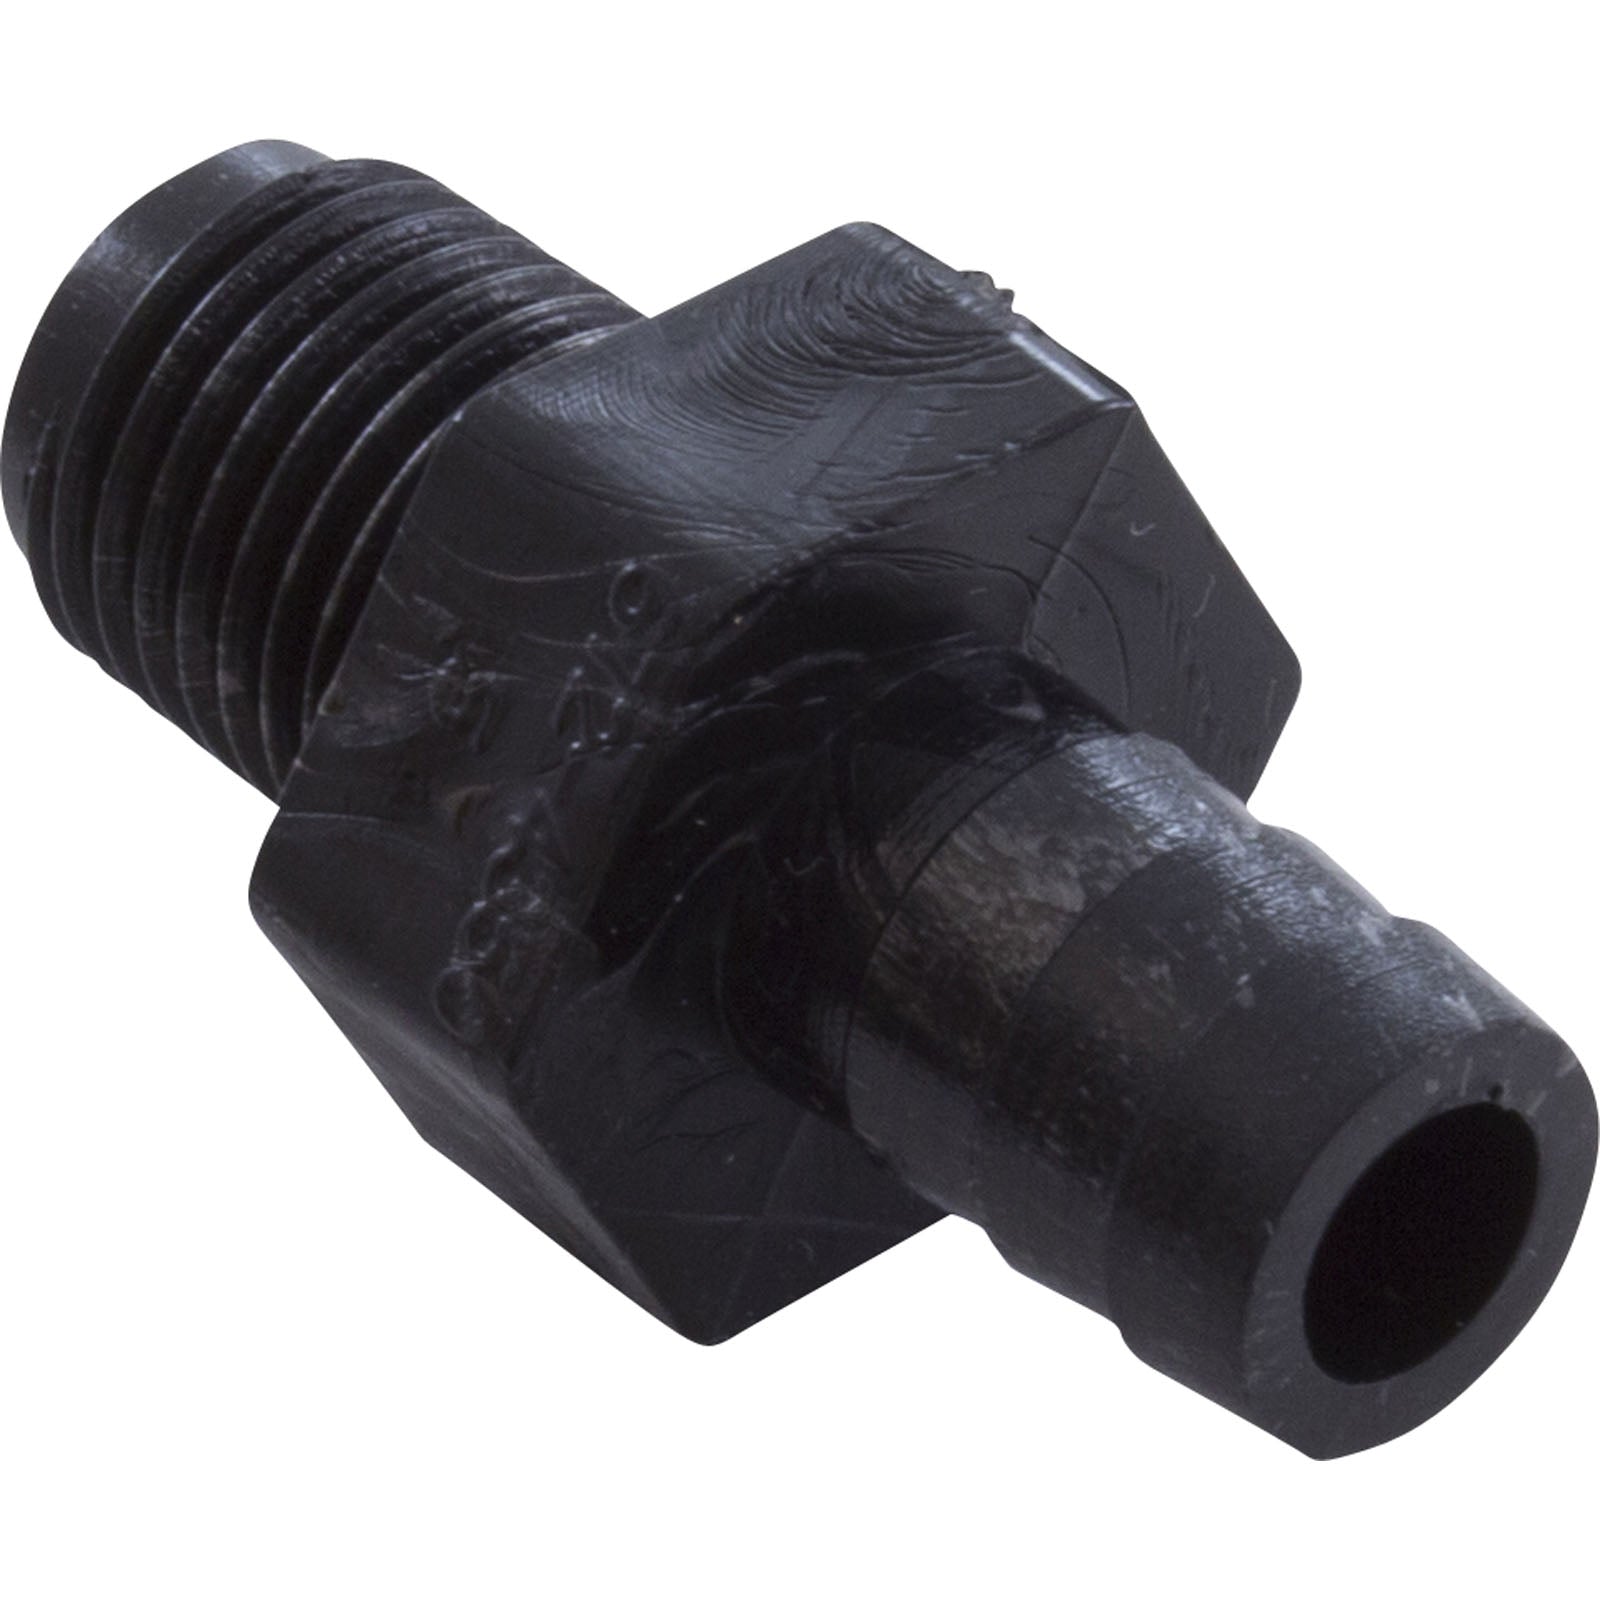 Barb Adapter, Waterway 3/8" Barb x 1/4" Male Pipe Thread/ 672-4350